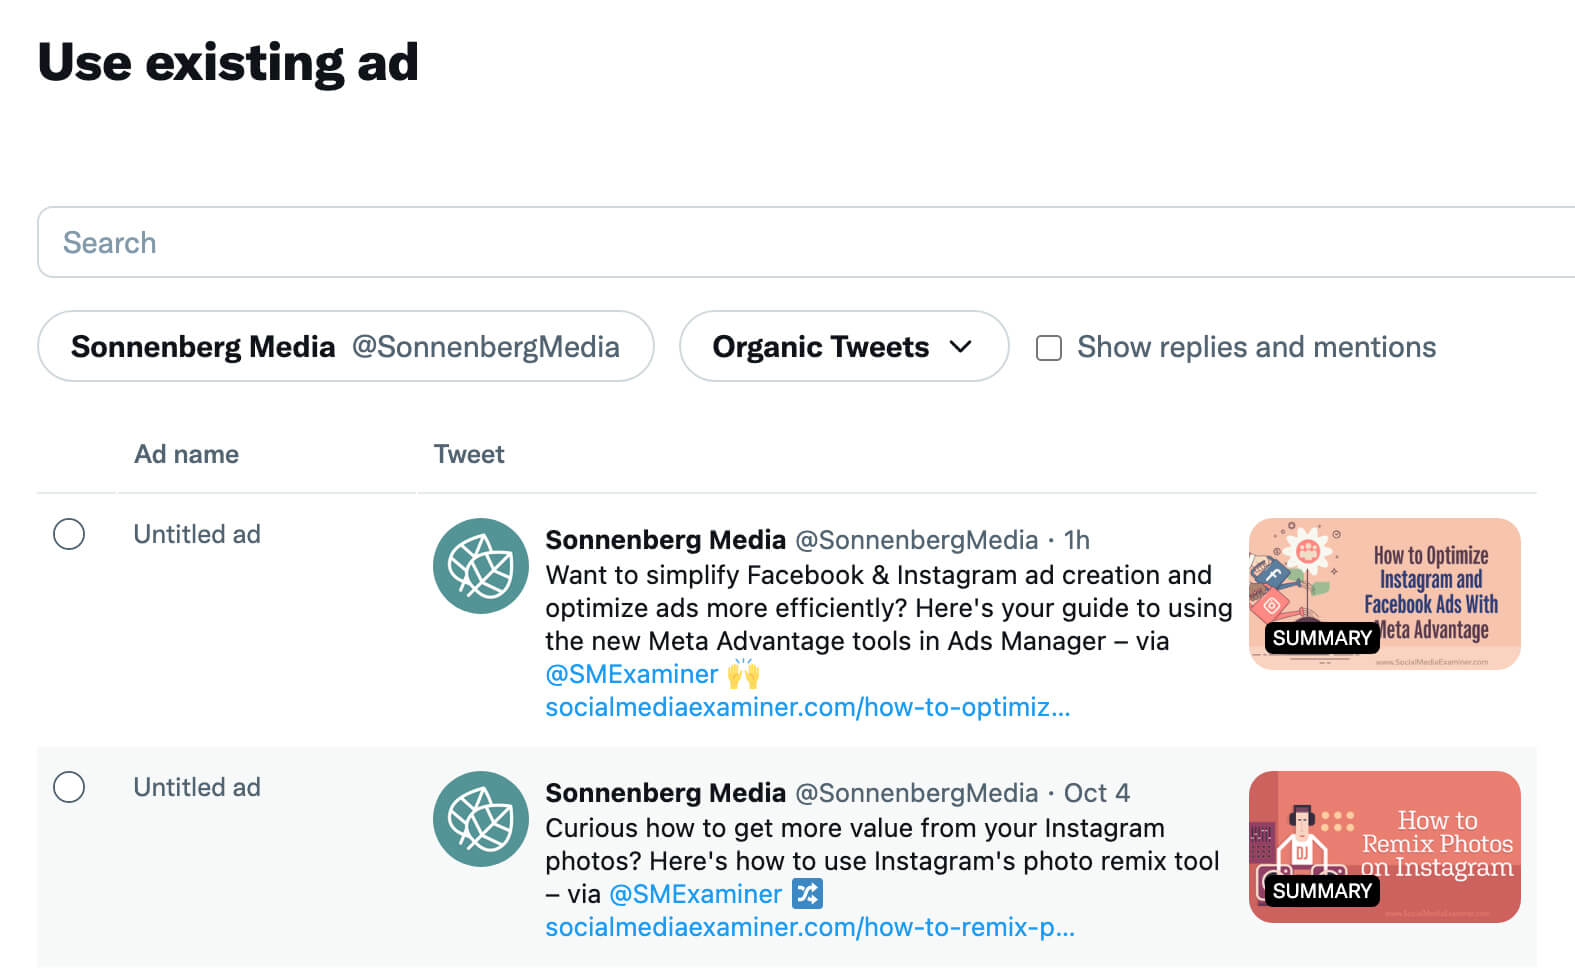 how-to-scale-twitter-ads-expand-your-target-audience-refresh-your-creative-assets-organic-tweets-add-to-ad-group-example-21